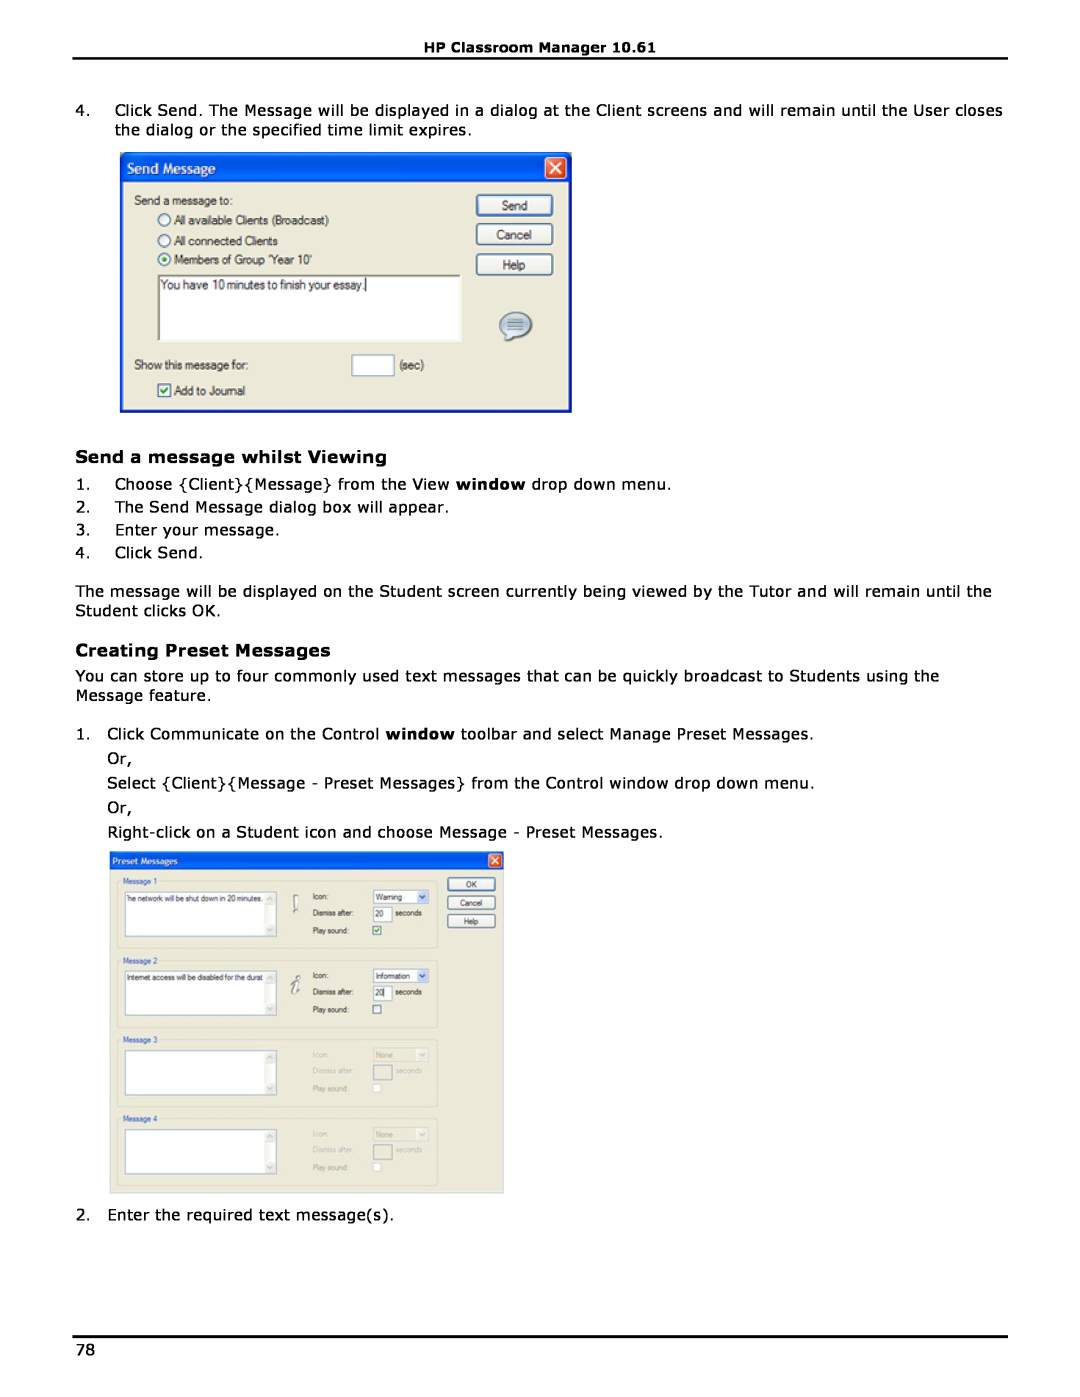 HP Classroom Manager manual Send a message whilst Viewing, Creating Preset Messages 